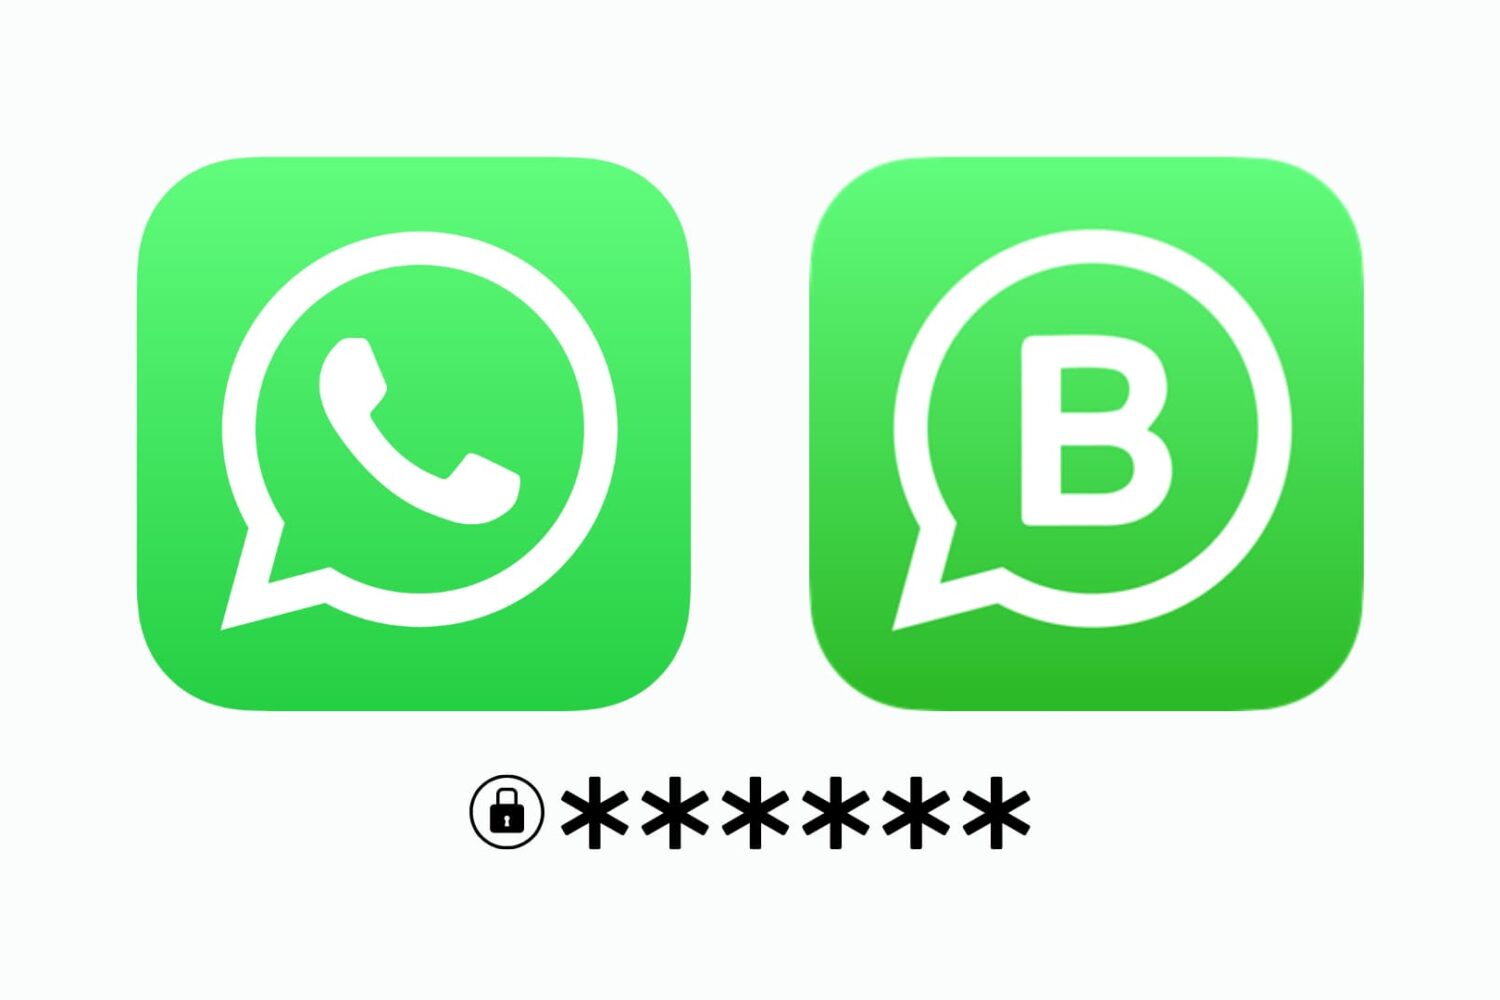 WhatsApp and WhatsApp Business app icons with six passcode stars for two-step verification